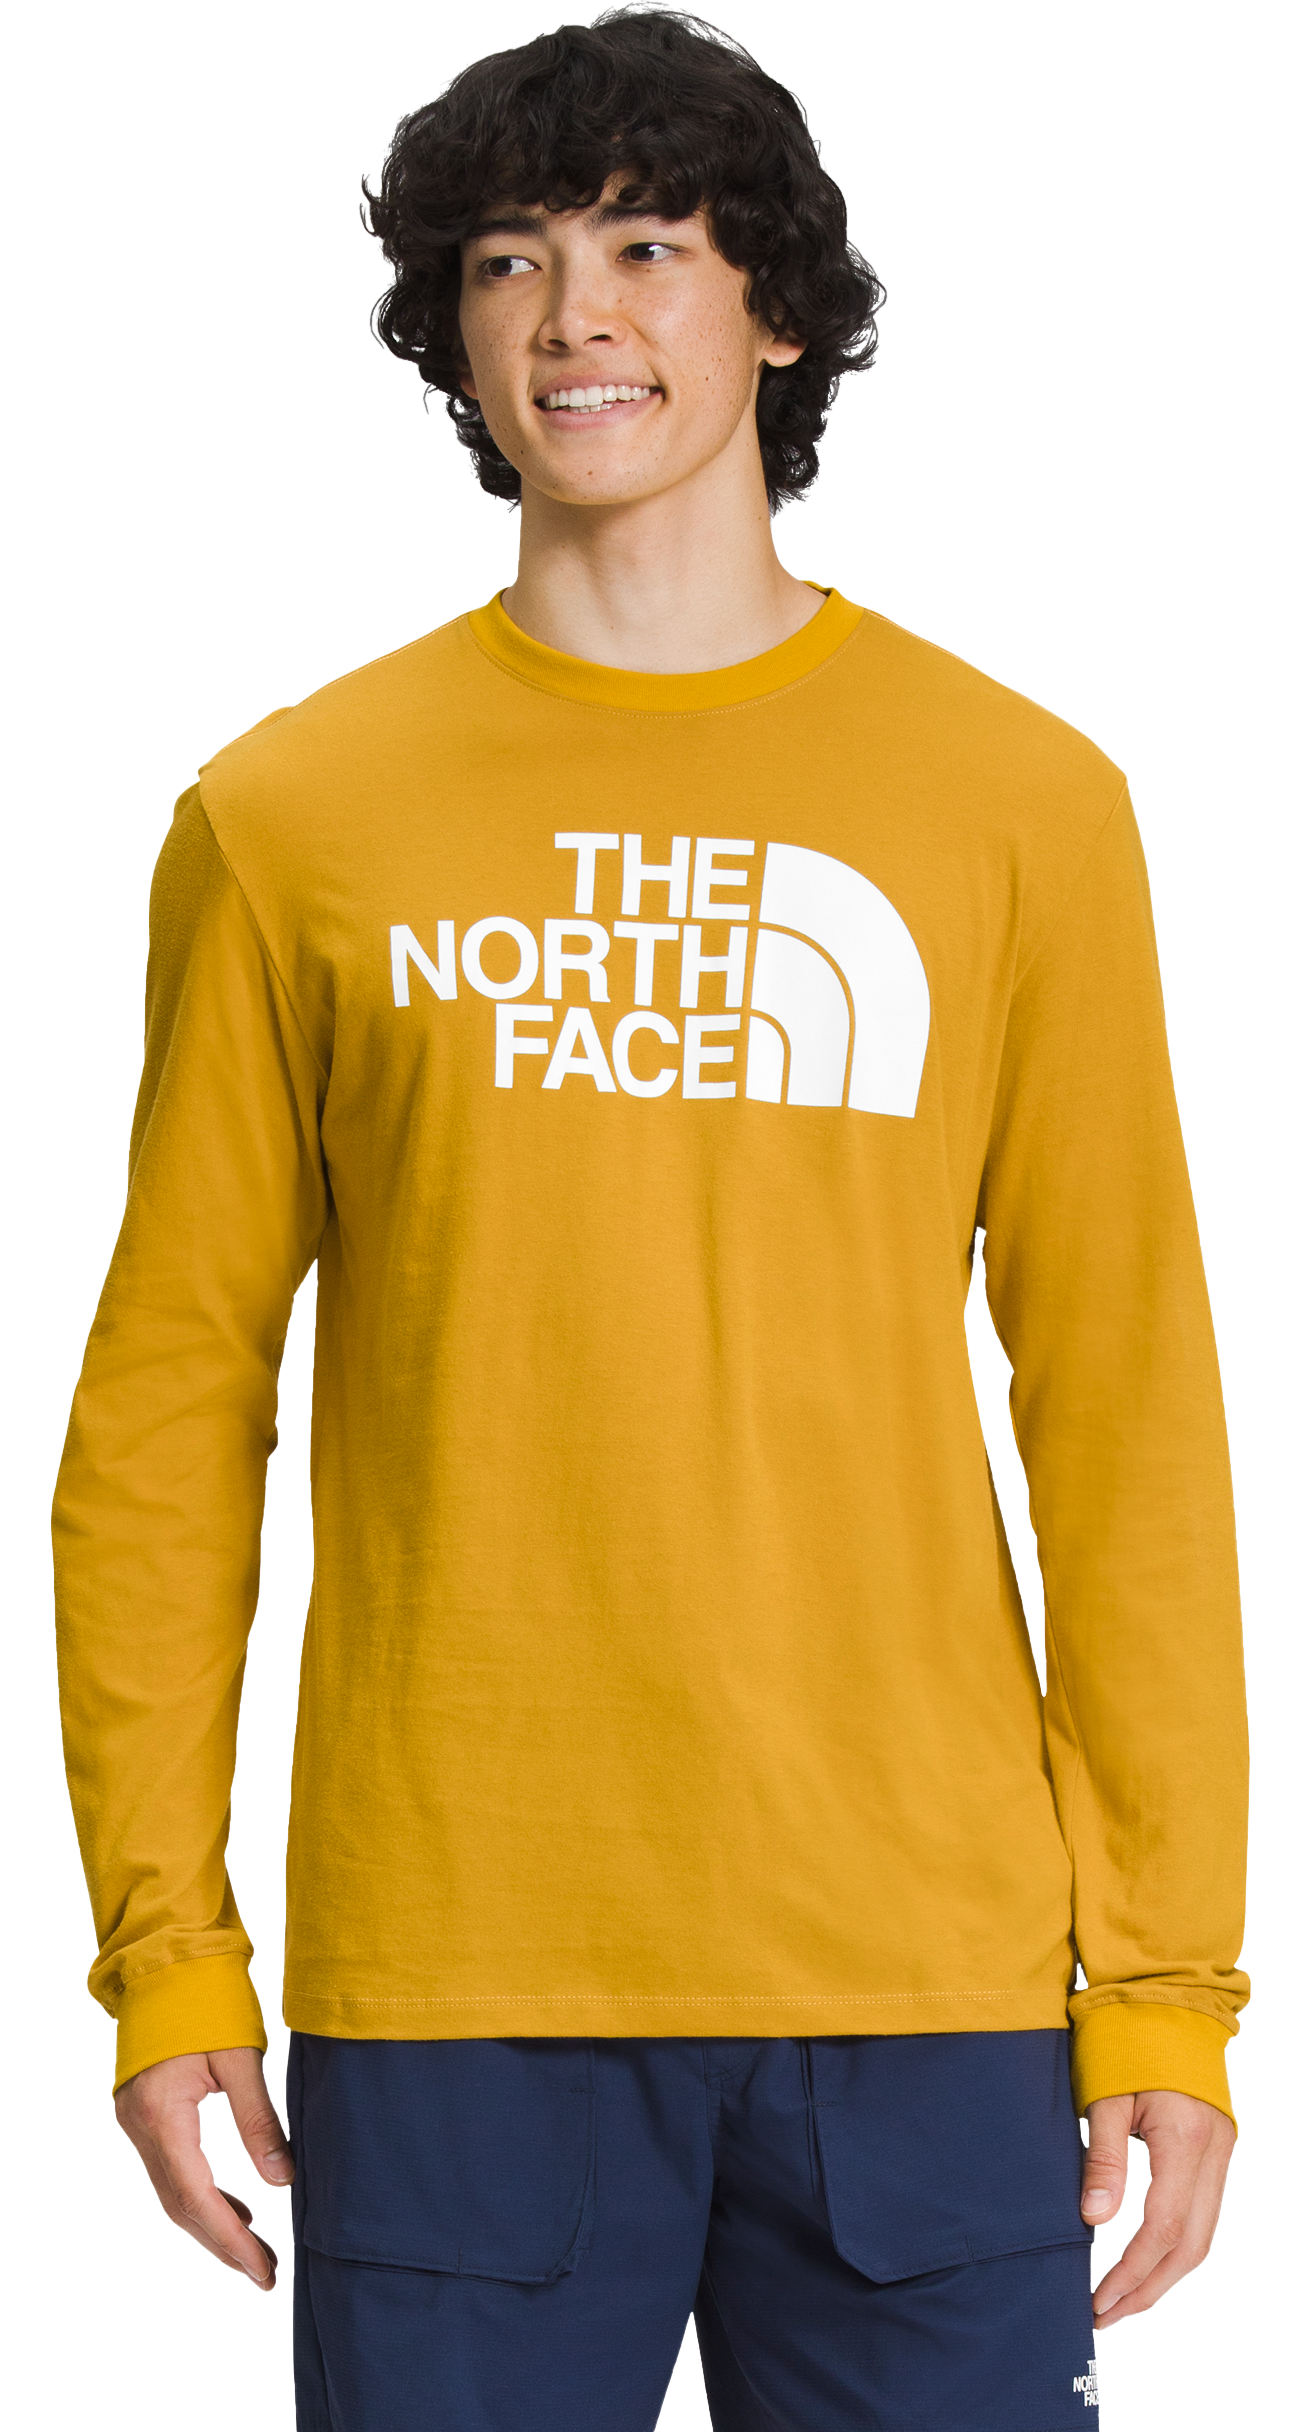 The North Face Half Dome Long-Sleeve T-Shirt for Men - Arrowwood Yellow/TNF White - 2XL